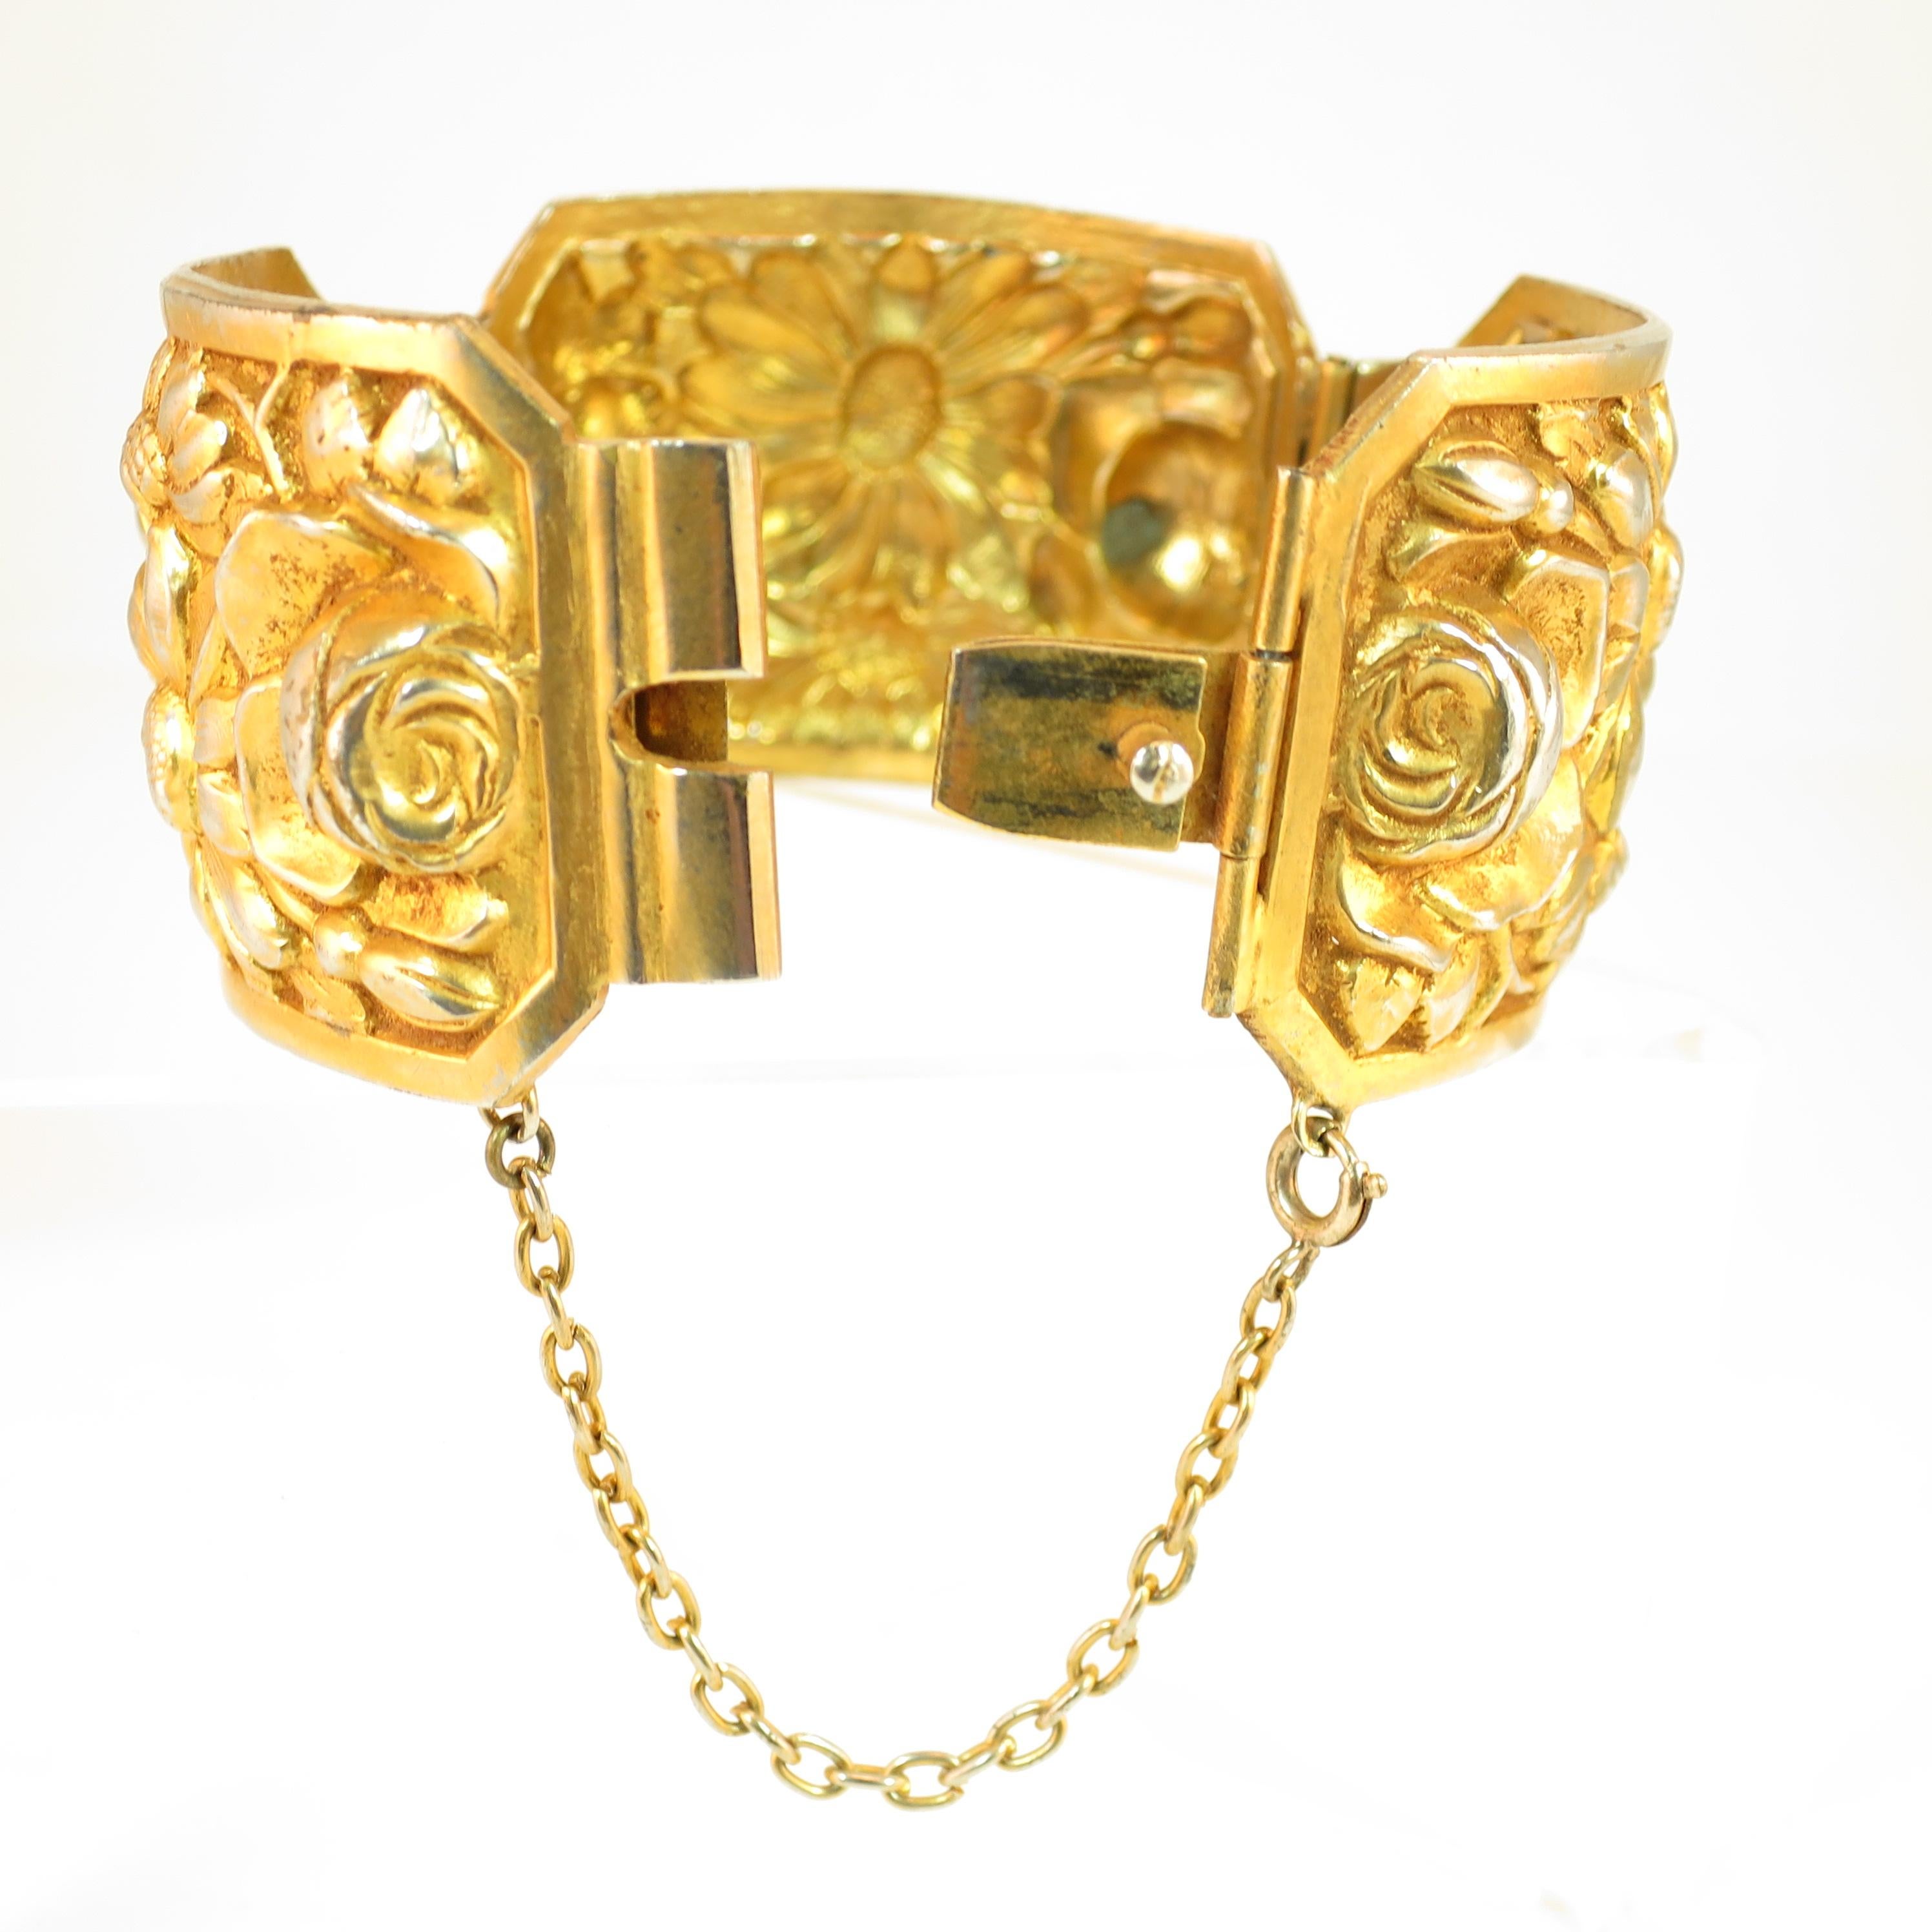 French Art Deco Gilded Floral Repousse Hinged Bracelet, 1920s im Zustand „Gut“ im Angebot in Burbank, CA